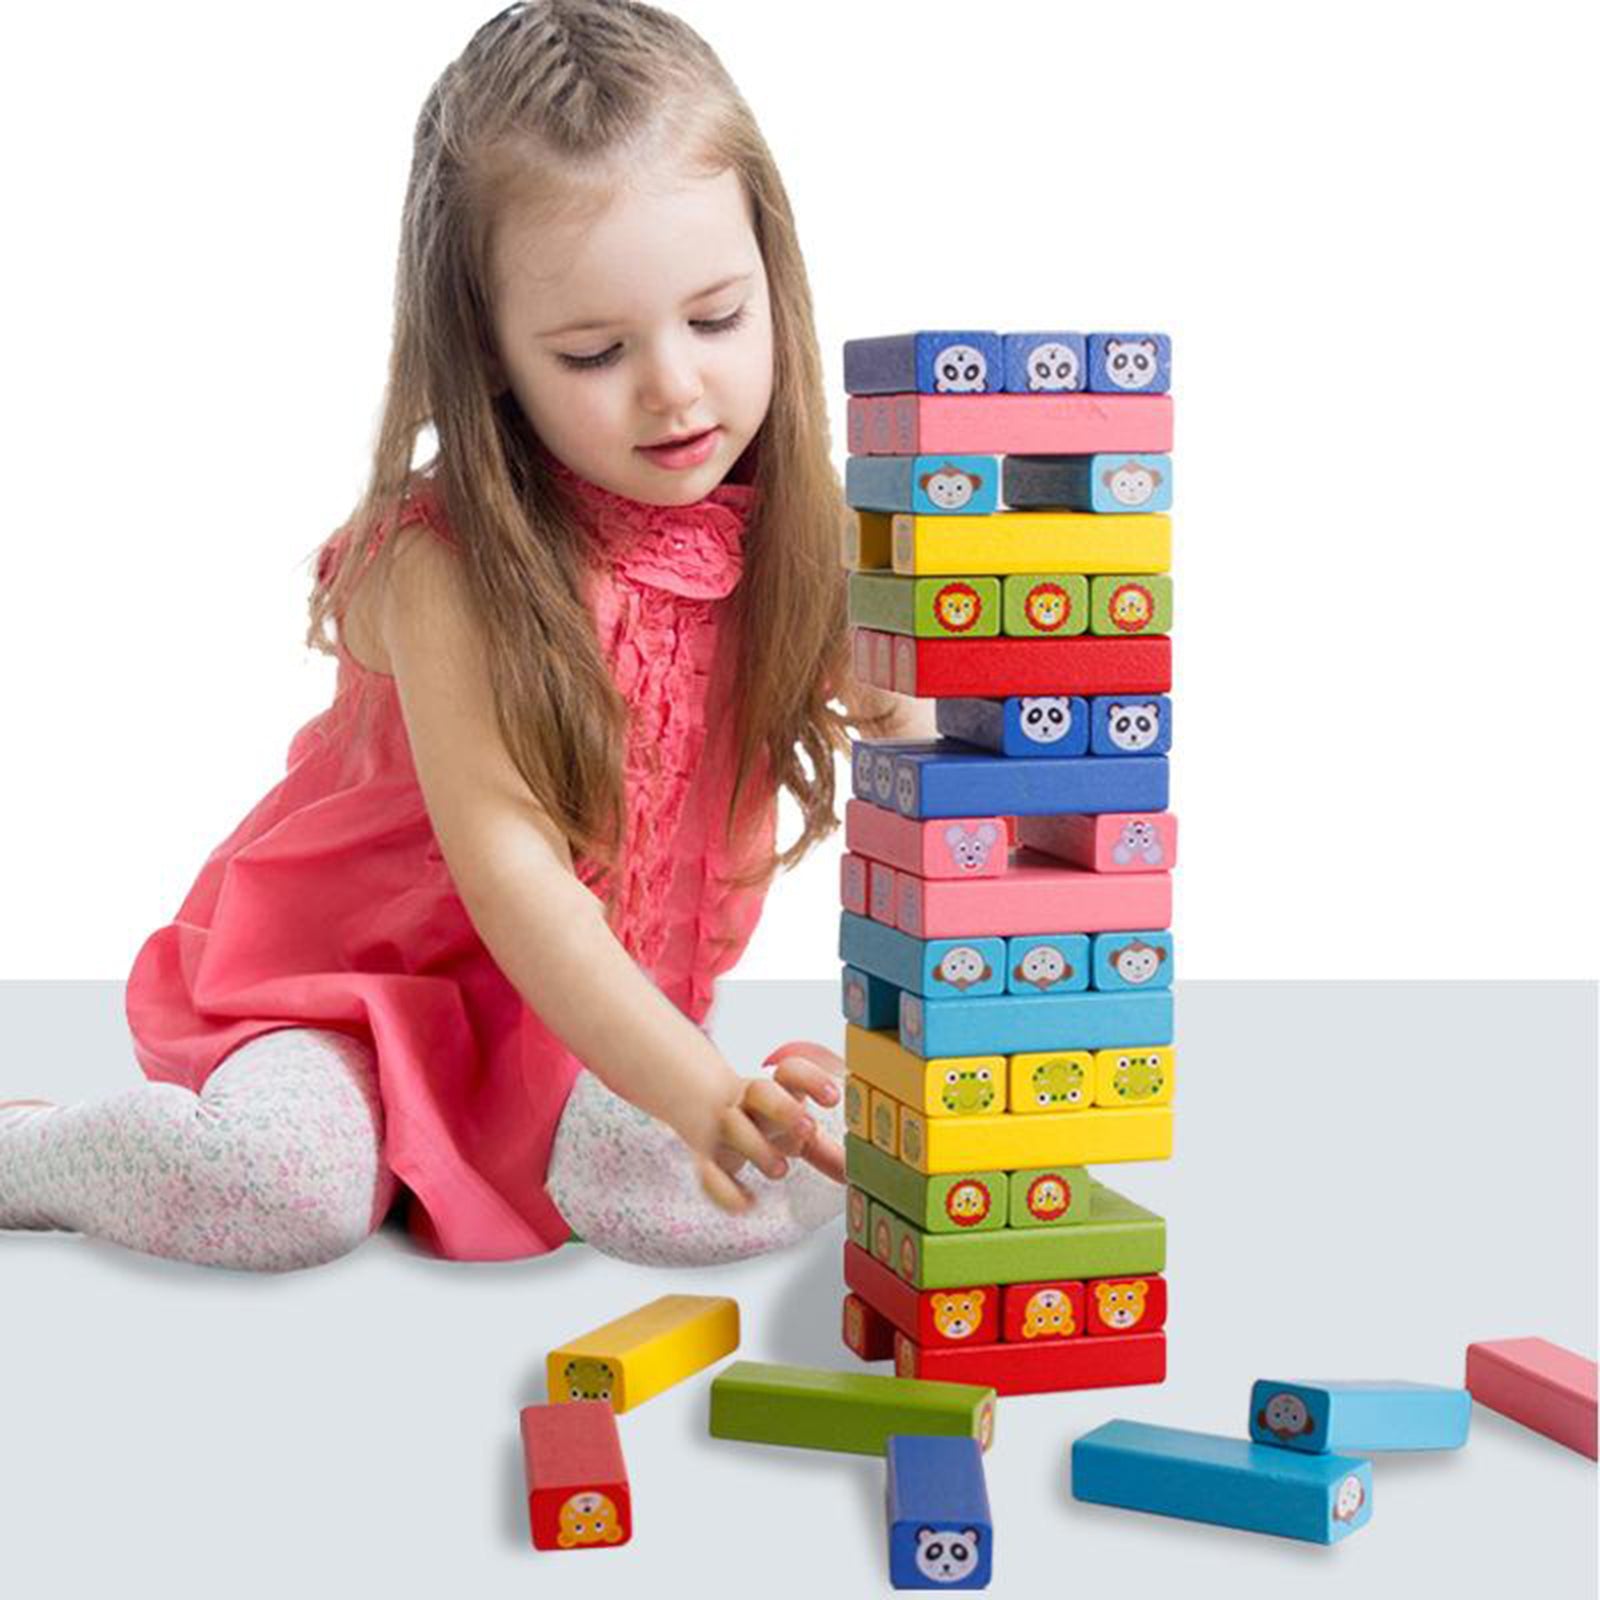 Wooden Tumbling Blocks Stacking Tower Game Toys For Kids Adults Family